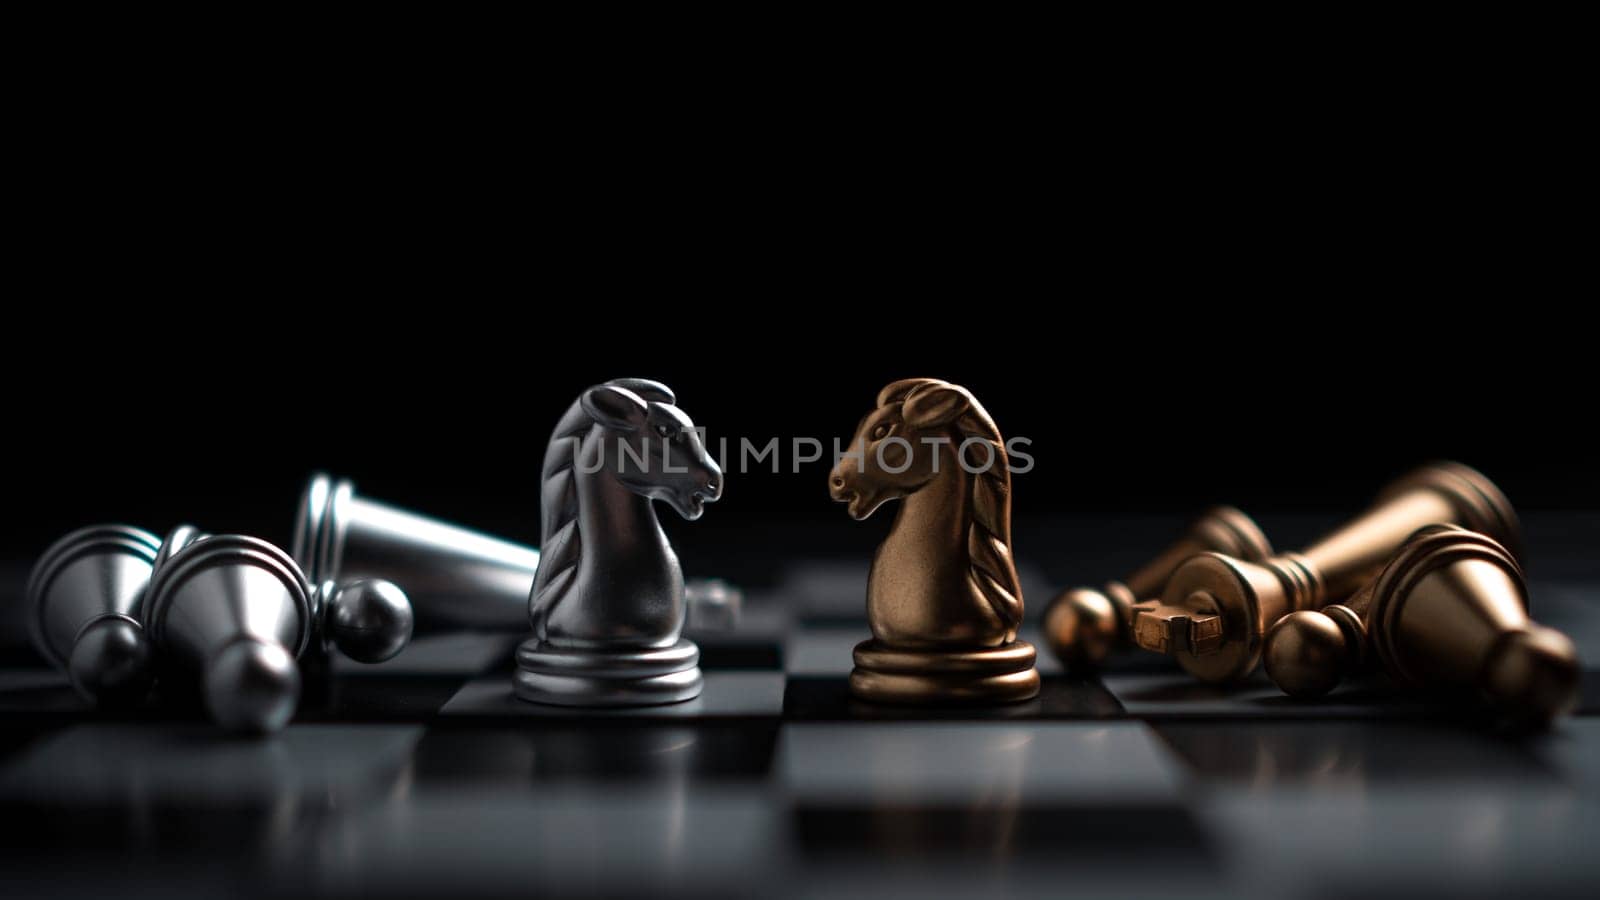 Gold and silver chess pieces in chess board game for business comparison. Leadership concepts, human resource management concepts, business administration concepts.